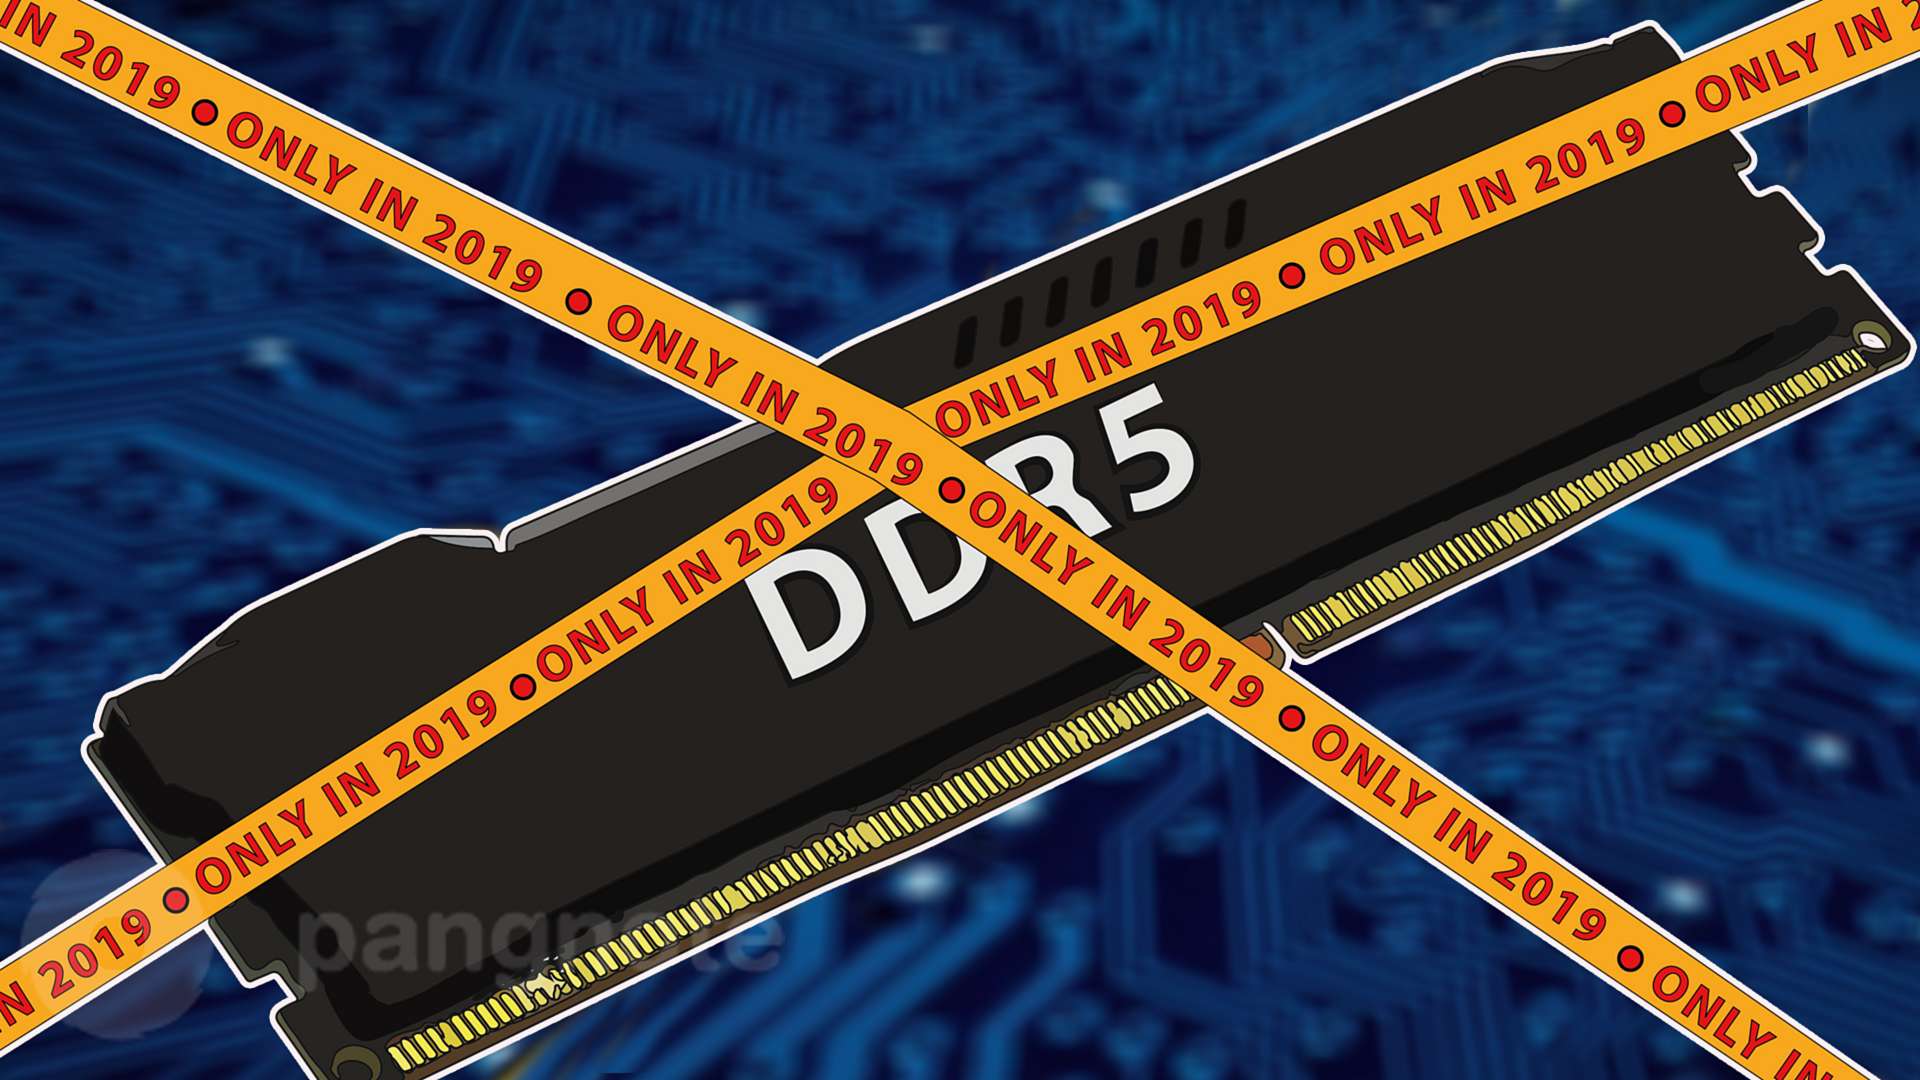 The DDR5 standard is likely to be only in 2019